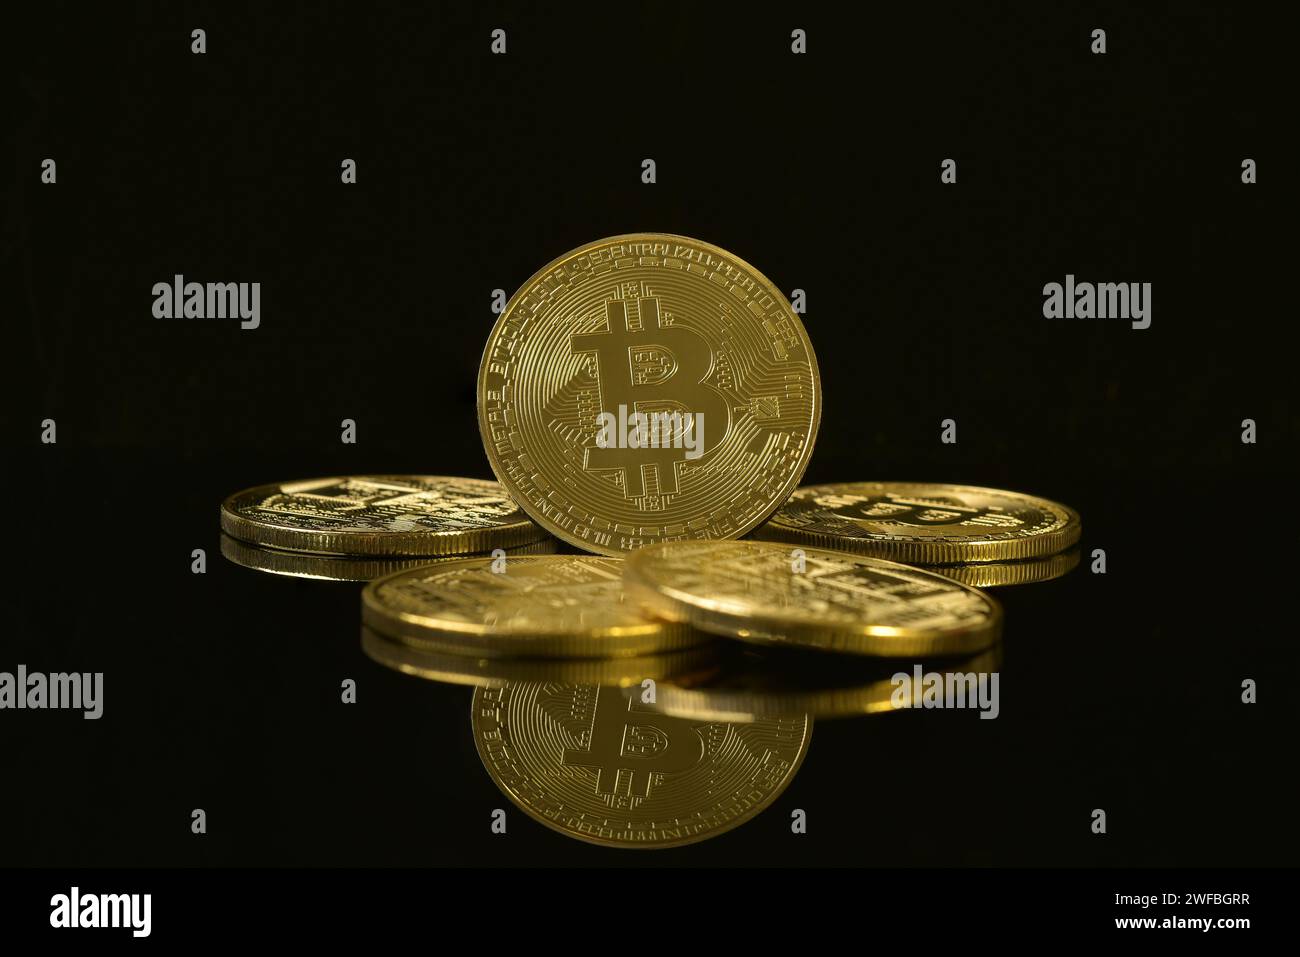 Photograph of golden Bitcoin isolated on black reflective background, surrounded by pile of coins. Cryptocurrency. Decentralised digital currency. Stock Photo